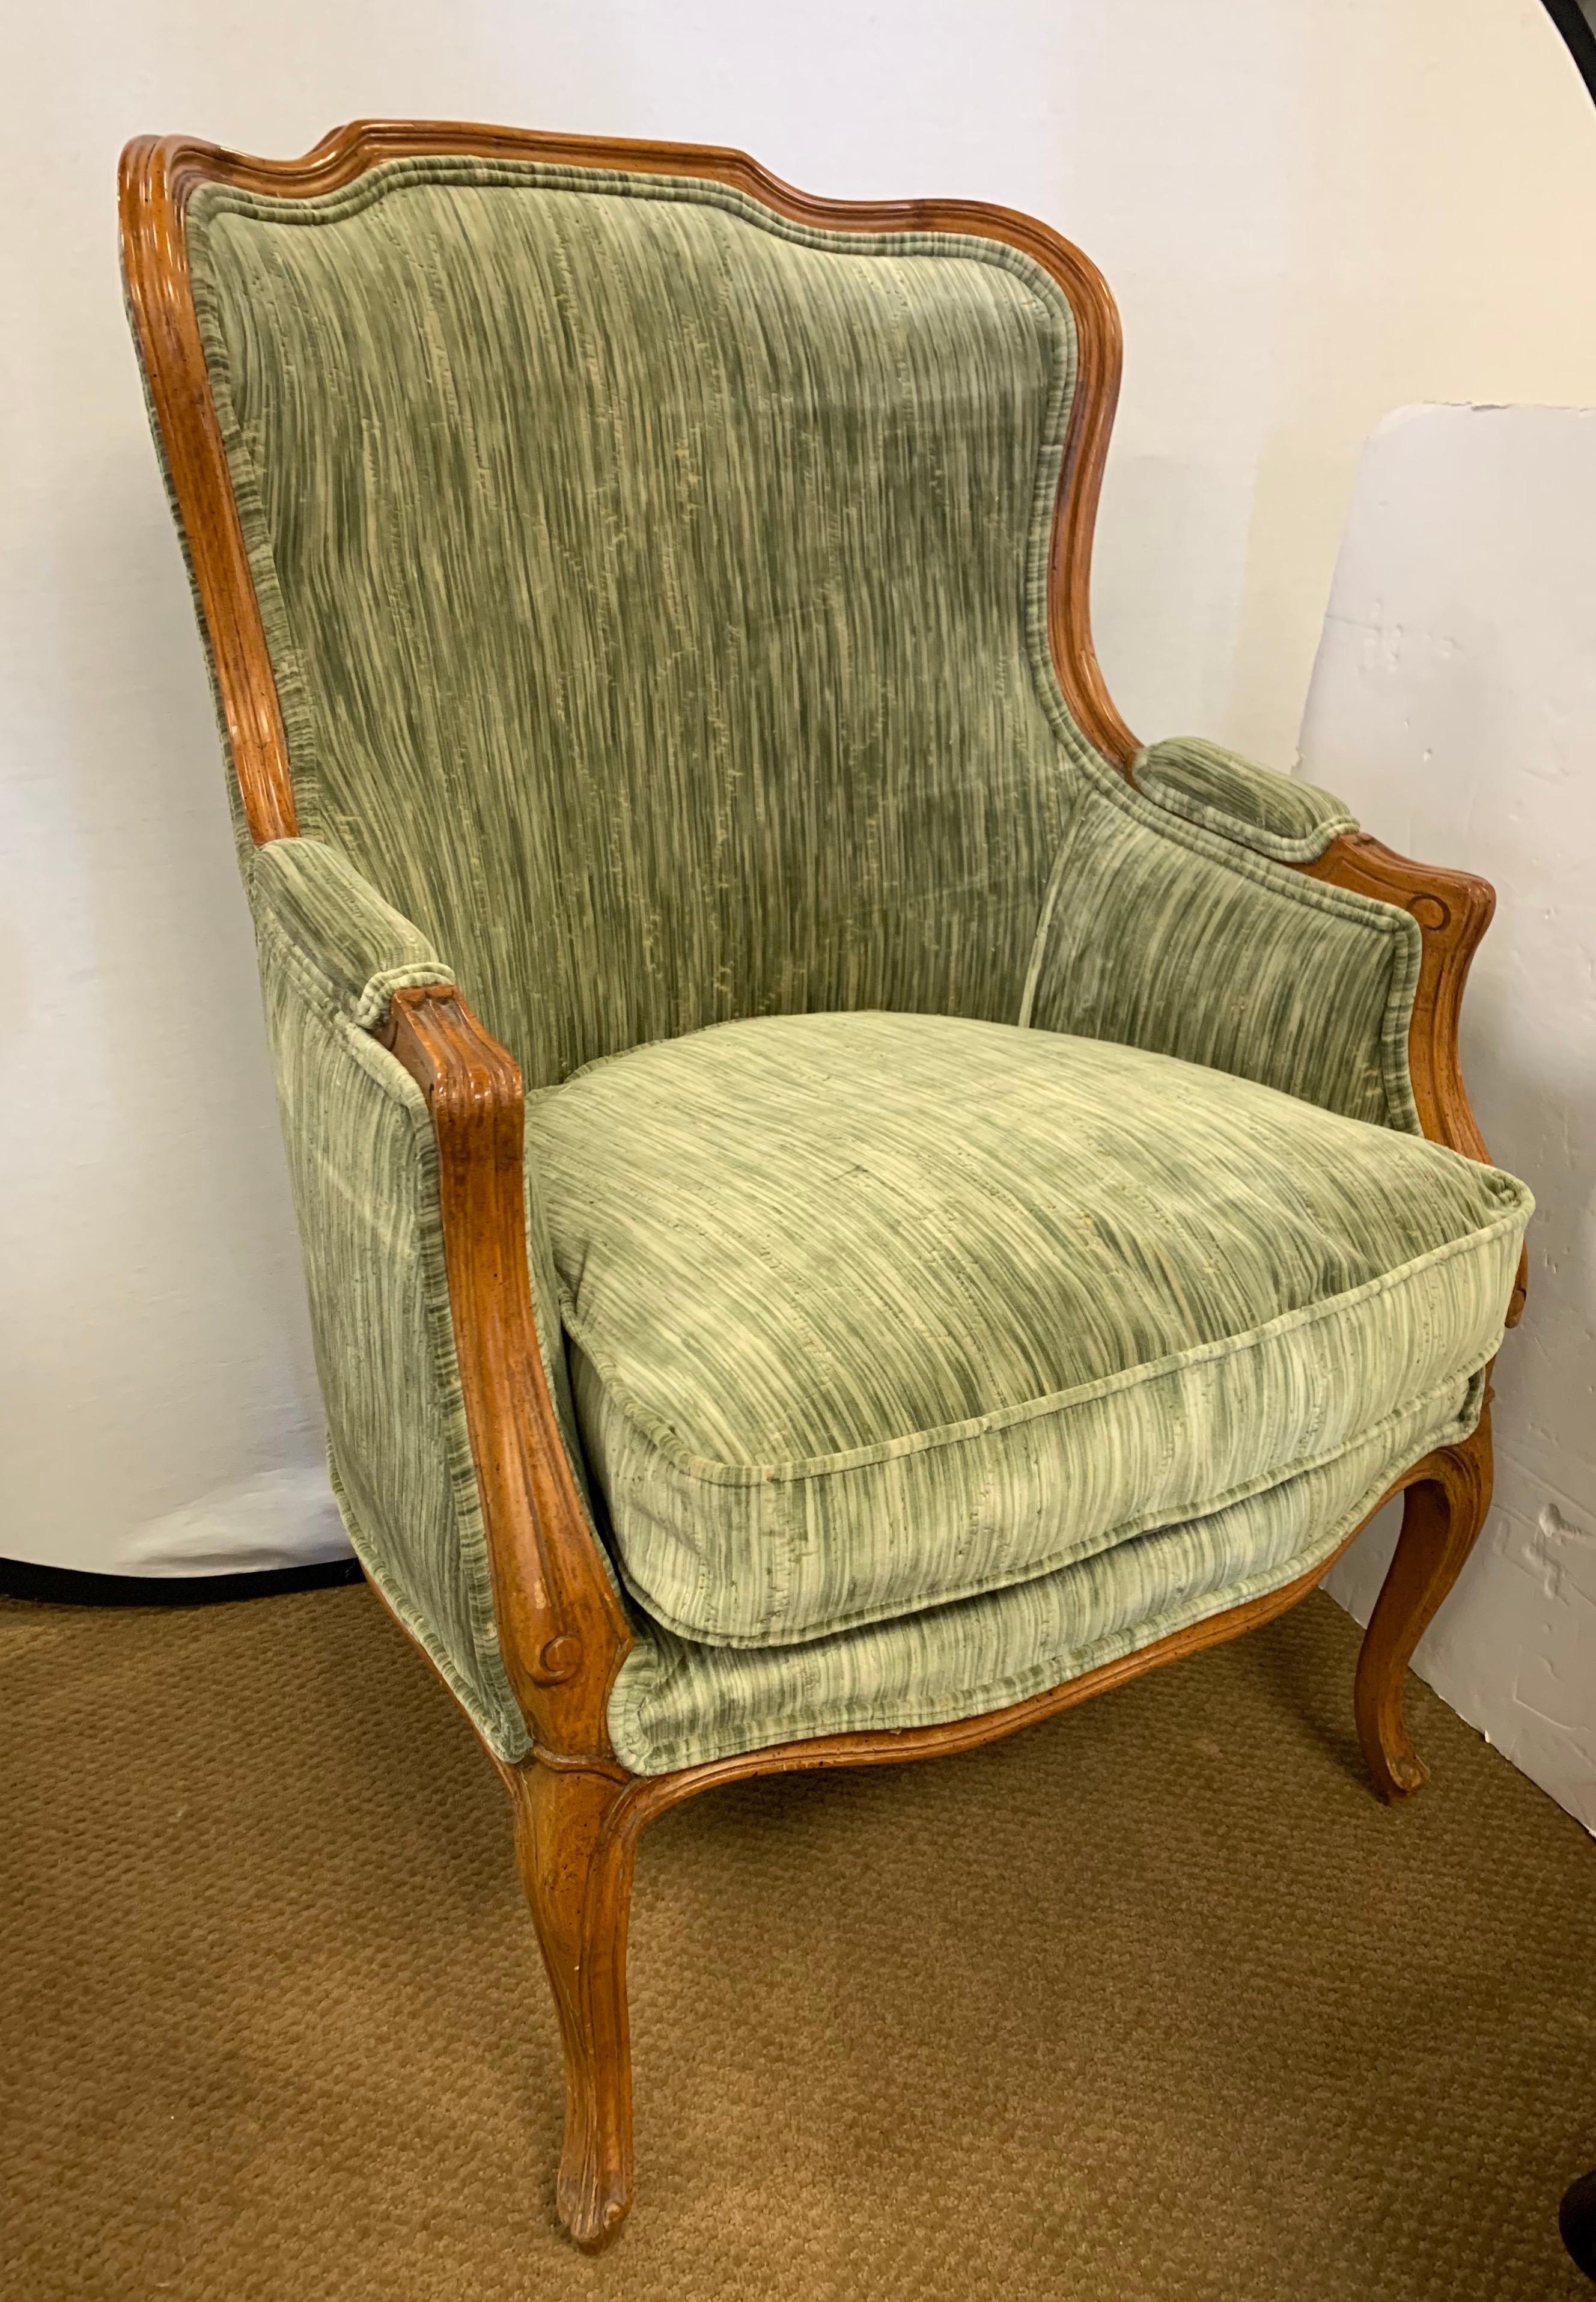 Louis XVI French Bergère Chair Newly Upholstered in Crushed Velvet Clarence House Textile